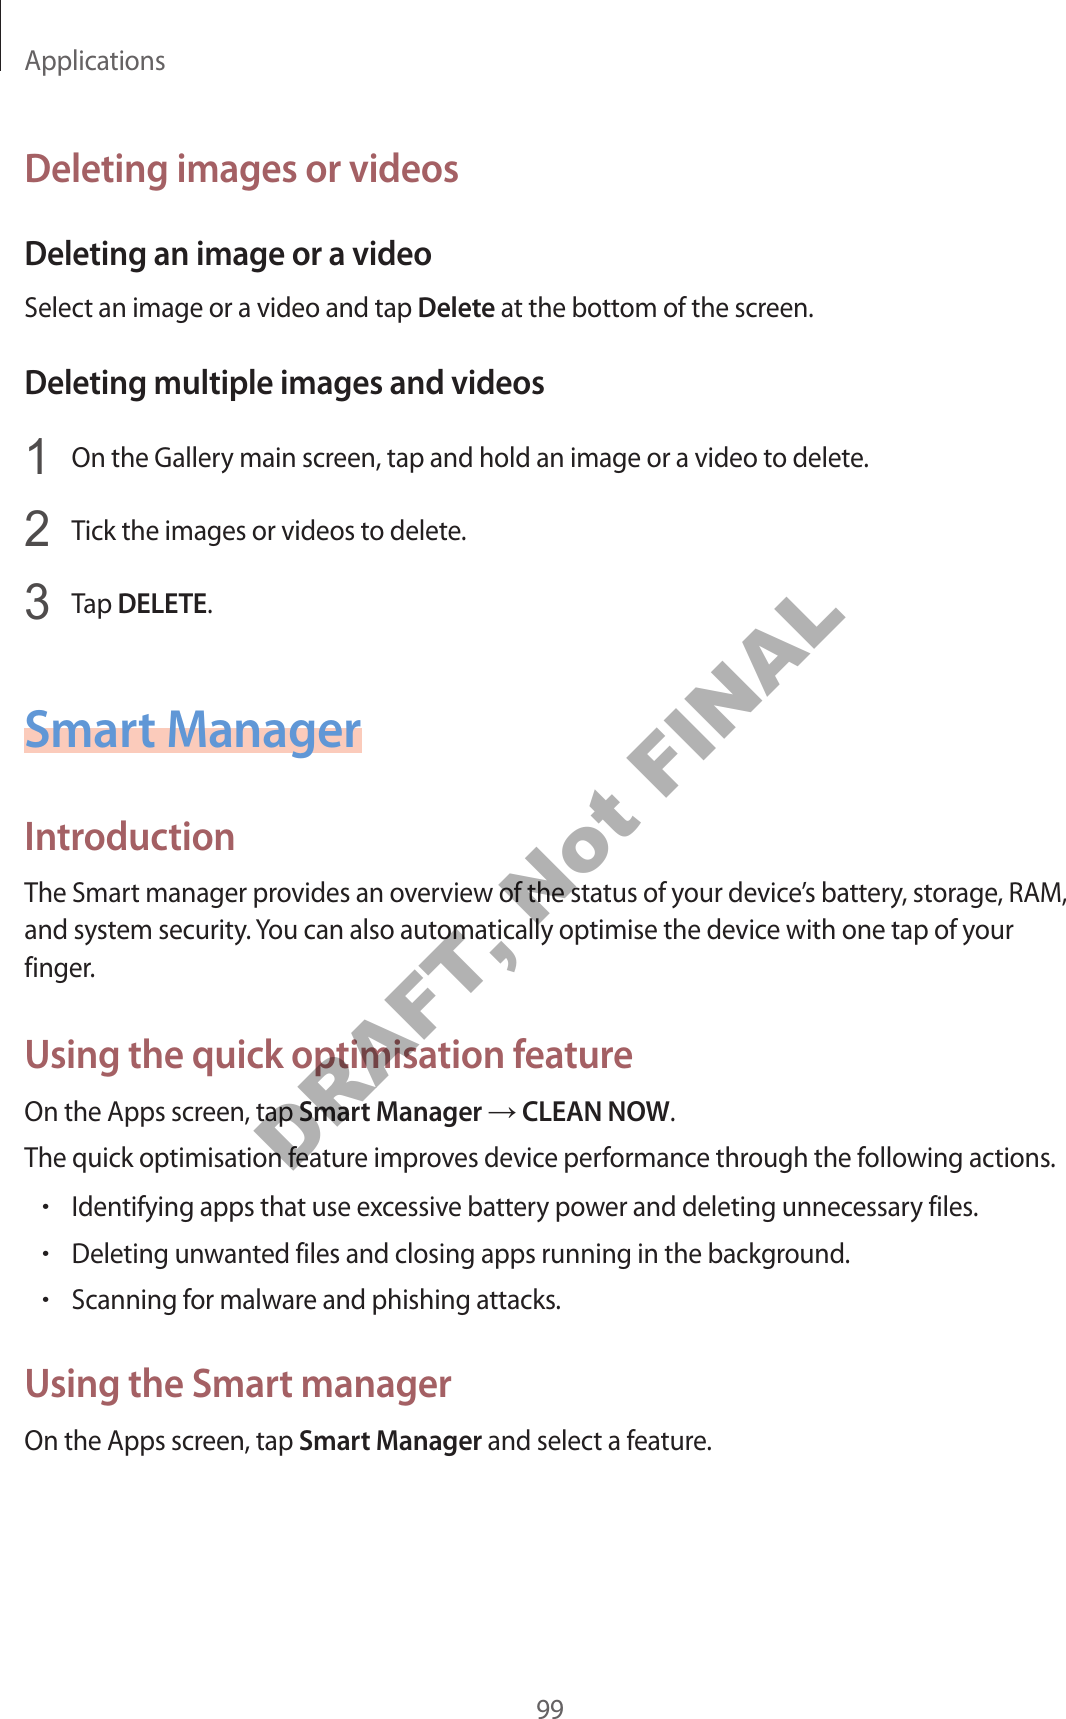 Applications99Deleting images or videosDeleting an image or a videoSelect an image or a video and tap Delete at the bottom of the screen.Deleting multiple images and videos1  On the Gallery main screen, tap and hold an image or a video to delete.2  Tick the images or videos to delete.3  Tap DELETE.Smart ManagerIntroductionThe Smart manager provides an overview of the status of your device’s battery, storage, RAM, and system security. You can also automatically optimise the device with one tap of your finger.Using the quick optimisation featureOn the Apps screen, tap Smart Manager ĺ CLEAN NOW.The quick optimisation feature improves device performance through the following actions.•Identifying apps that use excessive battery power and deleting unnecessary files.•Deleting unwanted files and closing apps running in the background.•Scanning for malware and phishing attacks.Using the Smart managerOn the Apps screen, tap Smart Manager and select a feature.DRAFT, Not FINAL